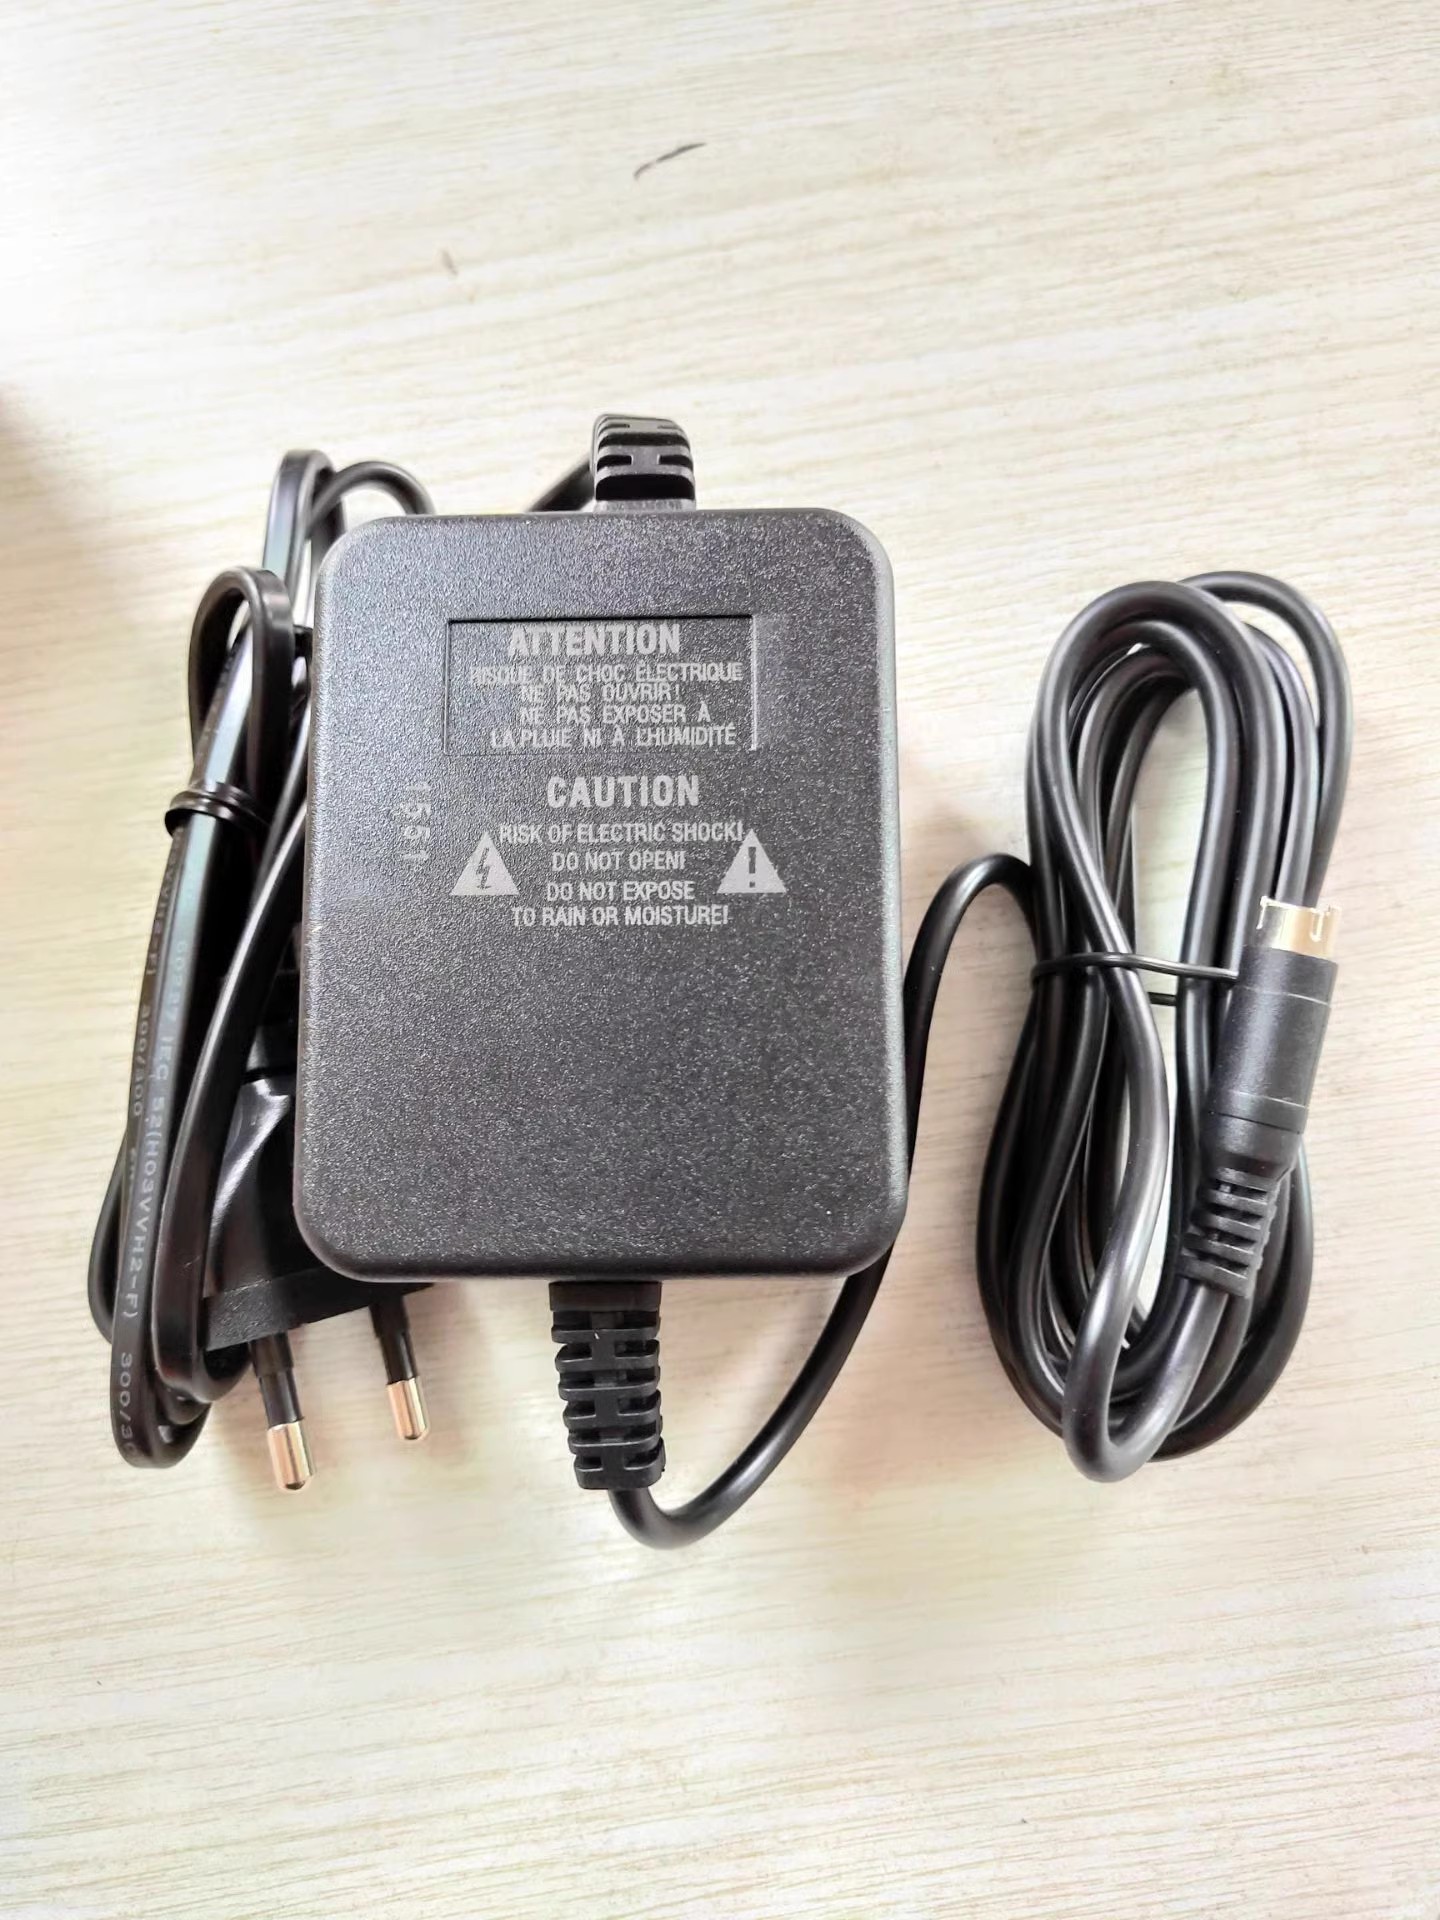 *Brand NEW* 2*17.5V 2*650MA AC DC ADAPTHE XENYX1202 MKR5 BEHRINGER POWER Supply